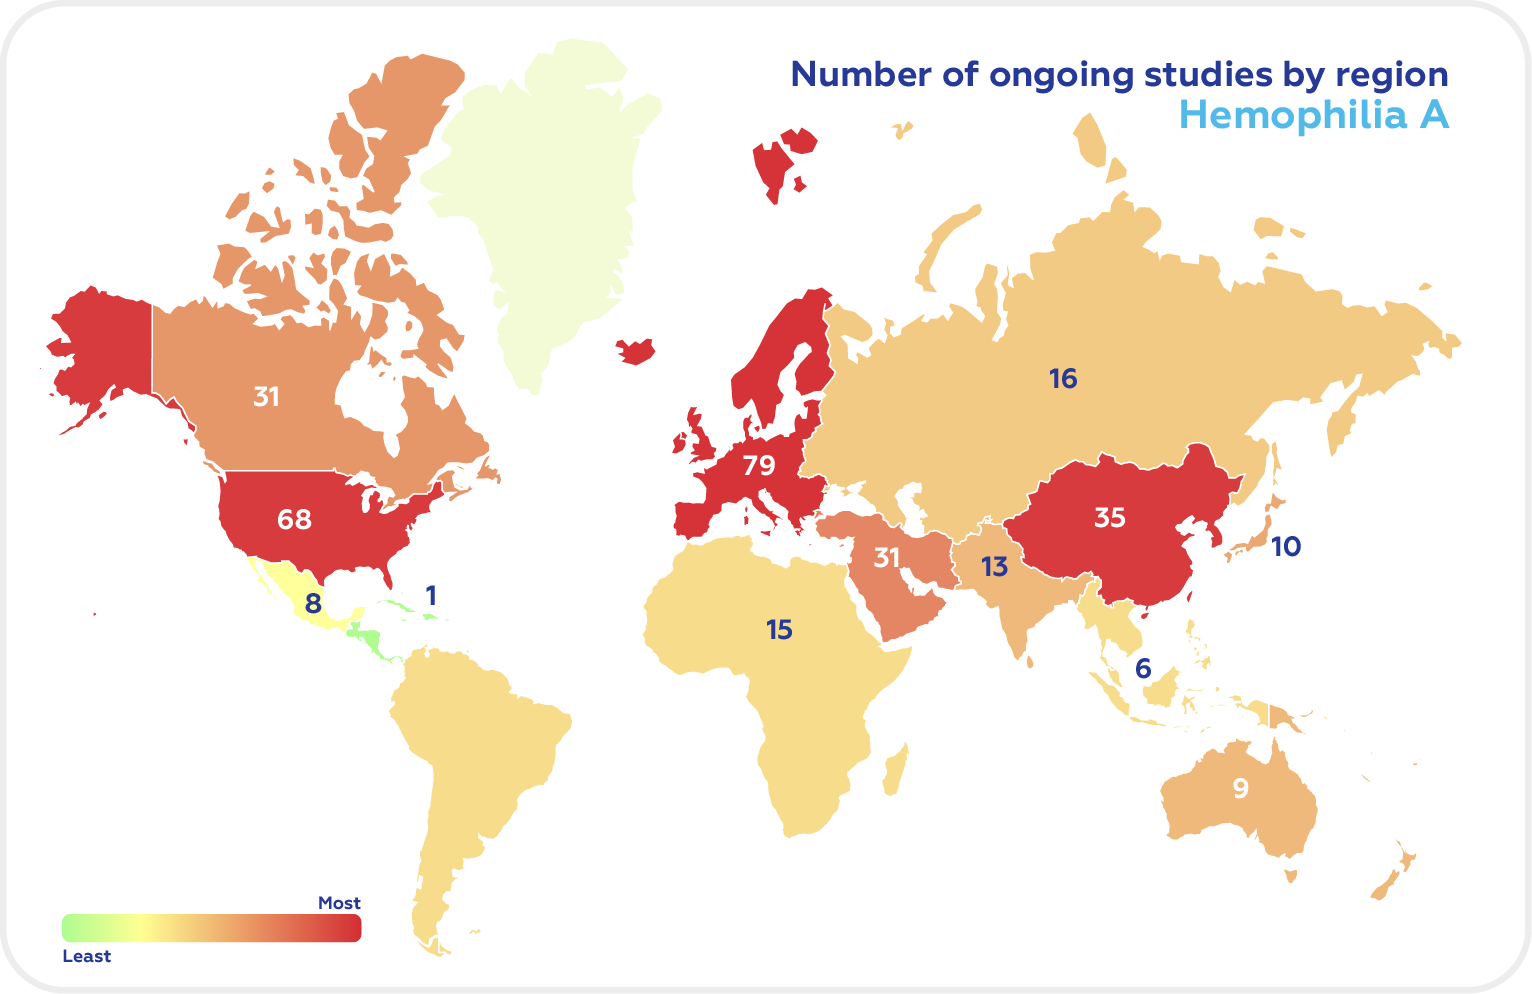 Number of ongoing studies by region A